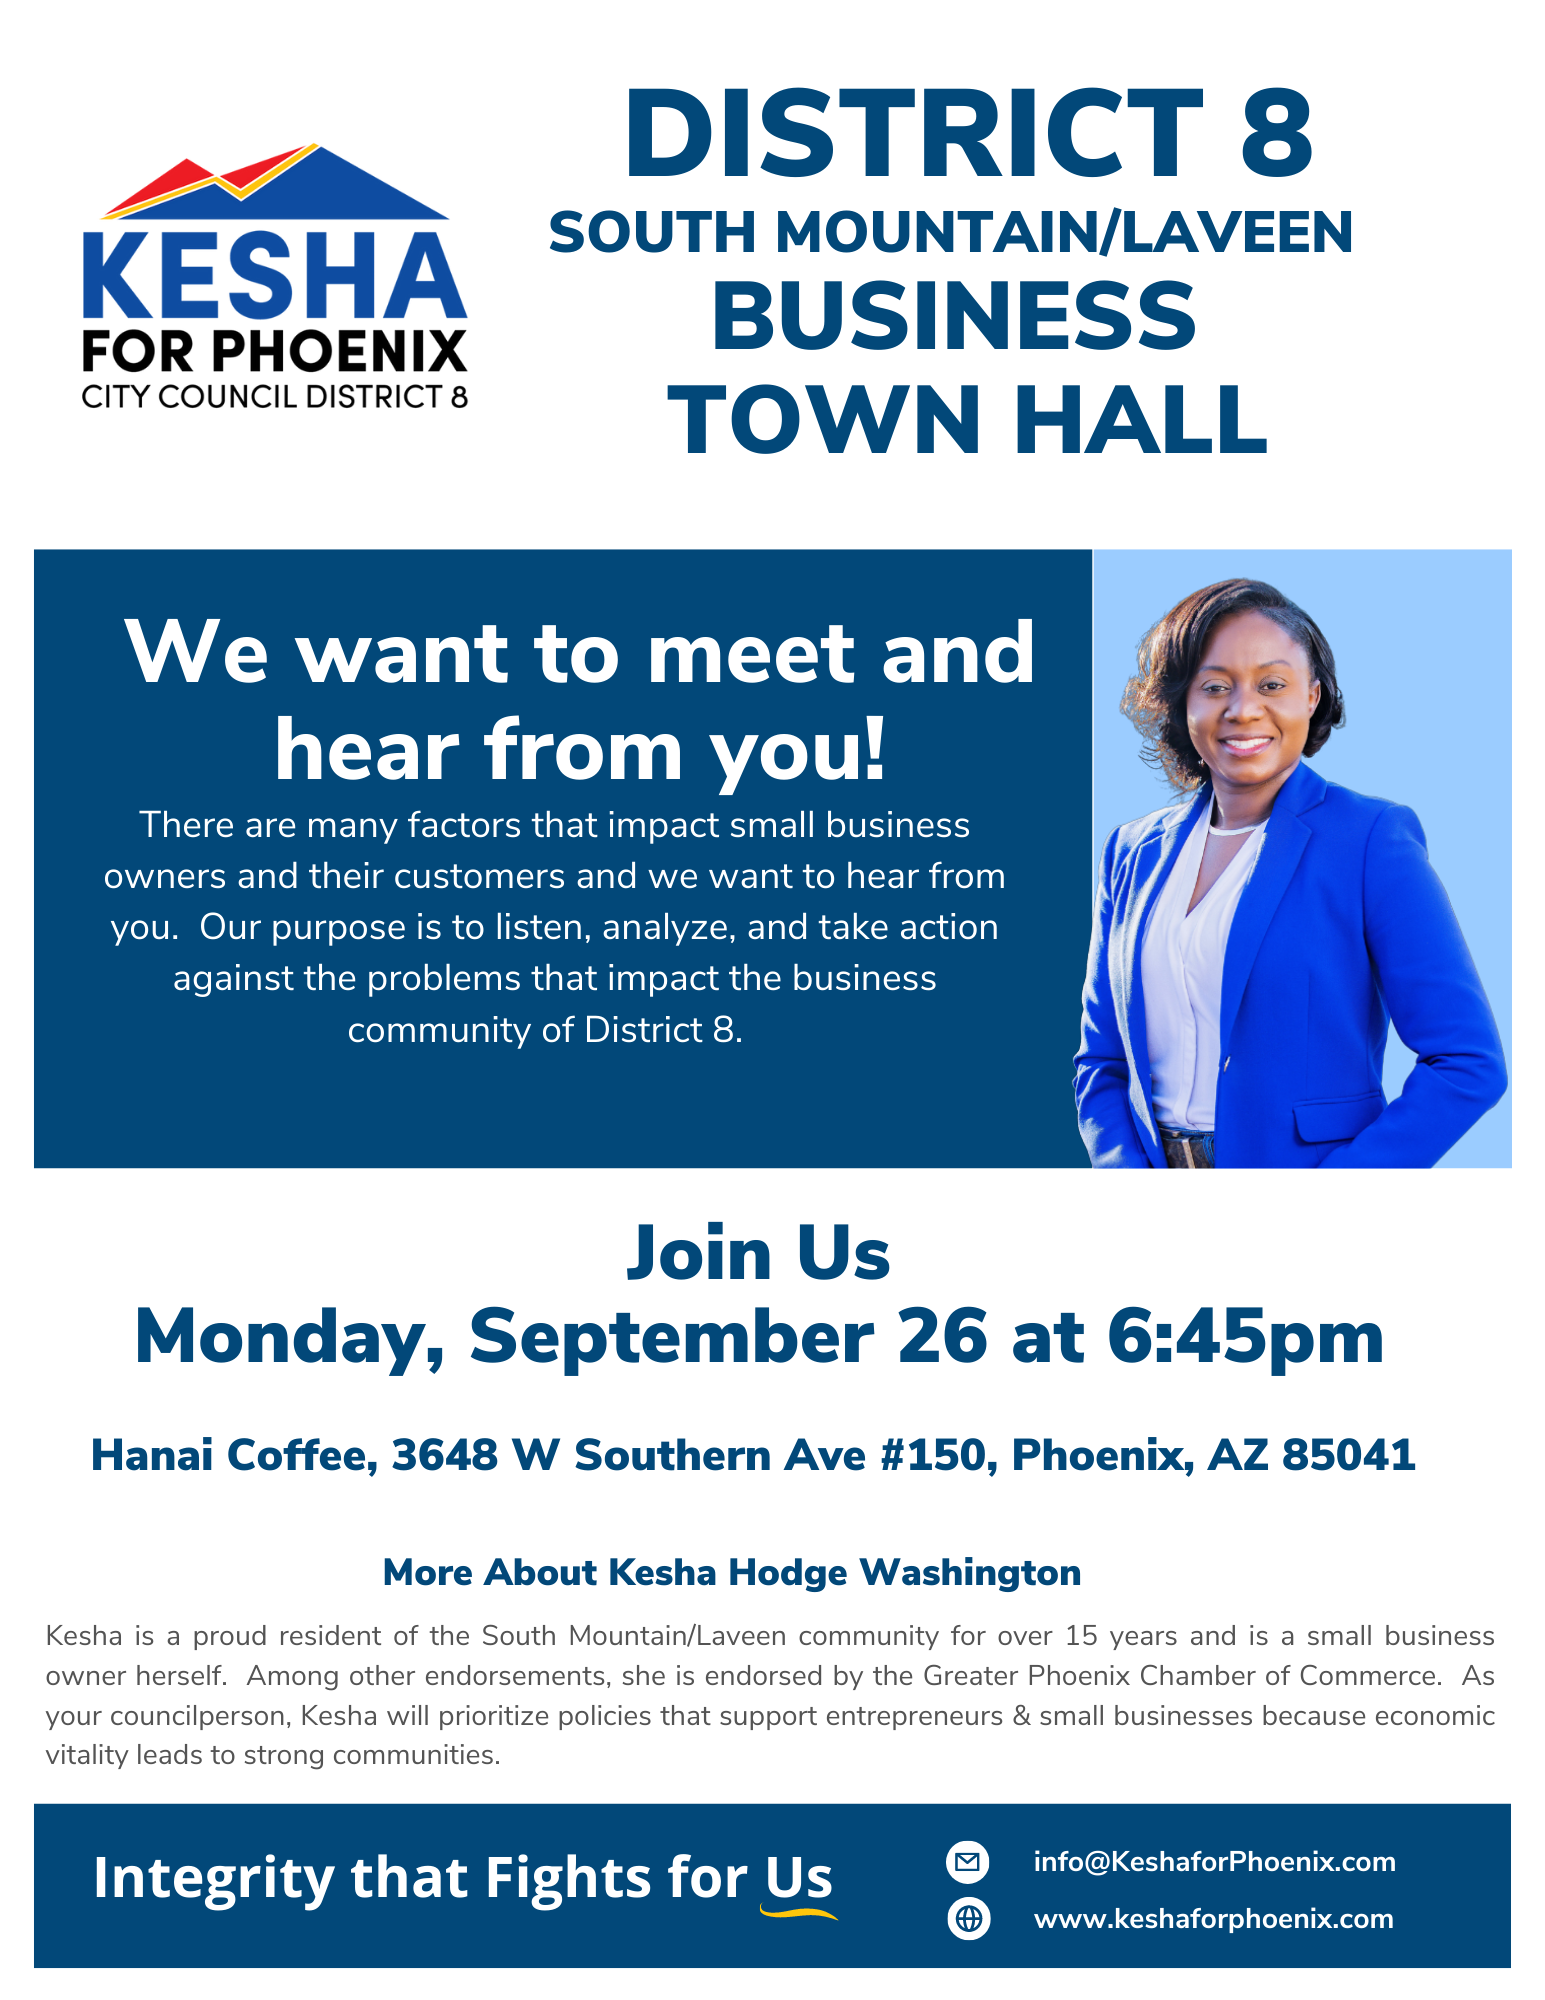 City Council Candidate Kesha Hodge Washington to Host Laveen / South Mountain Business Town Hall on September 26